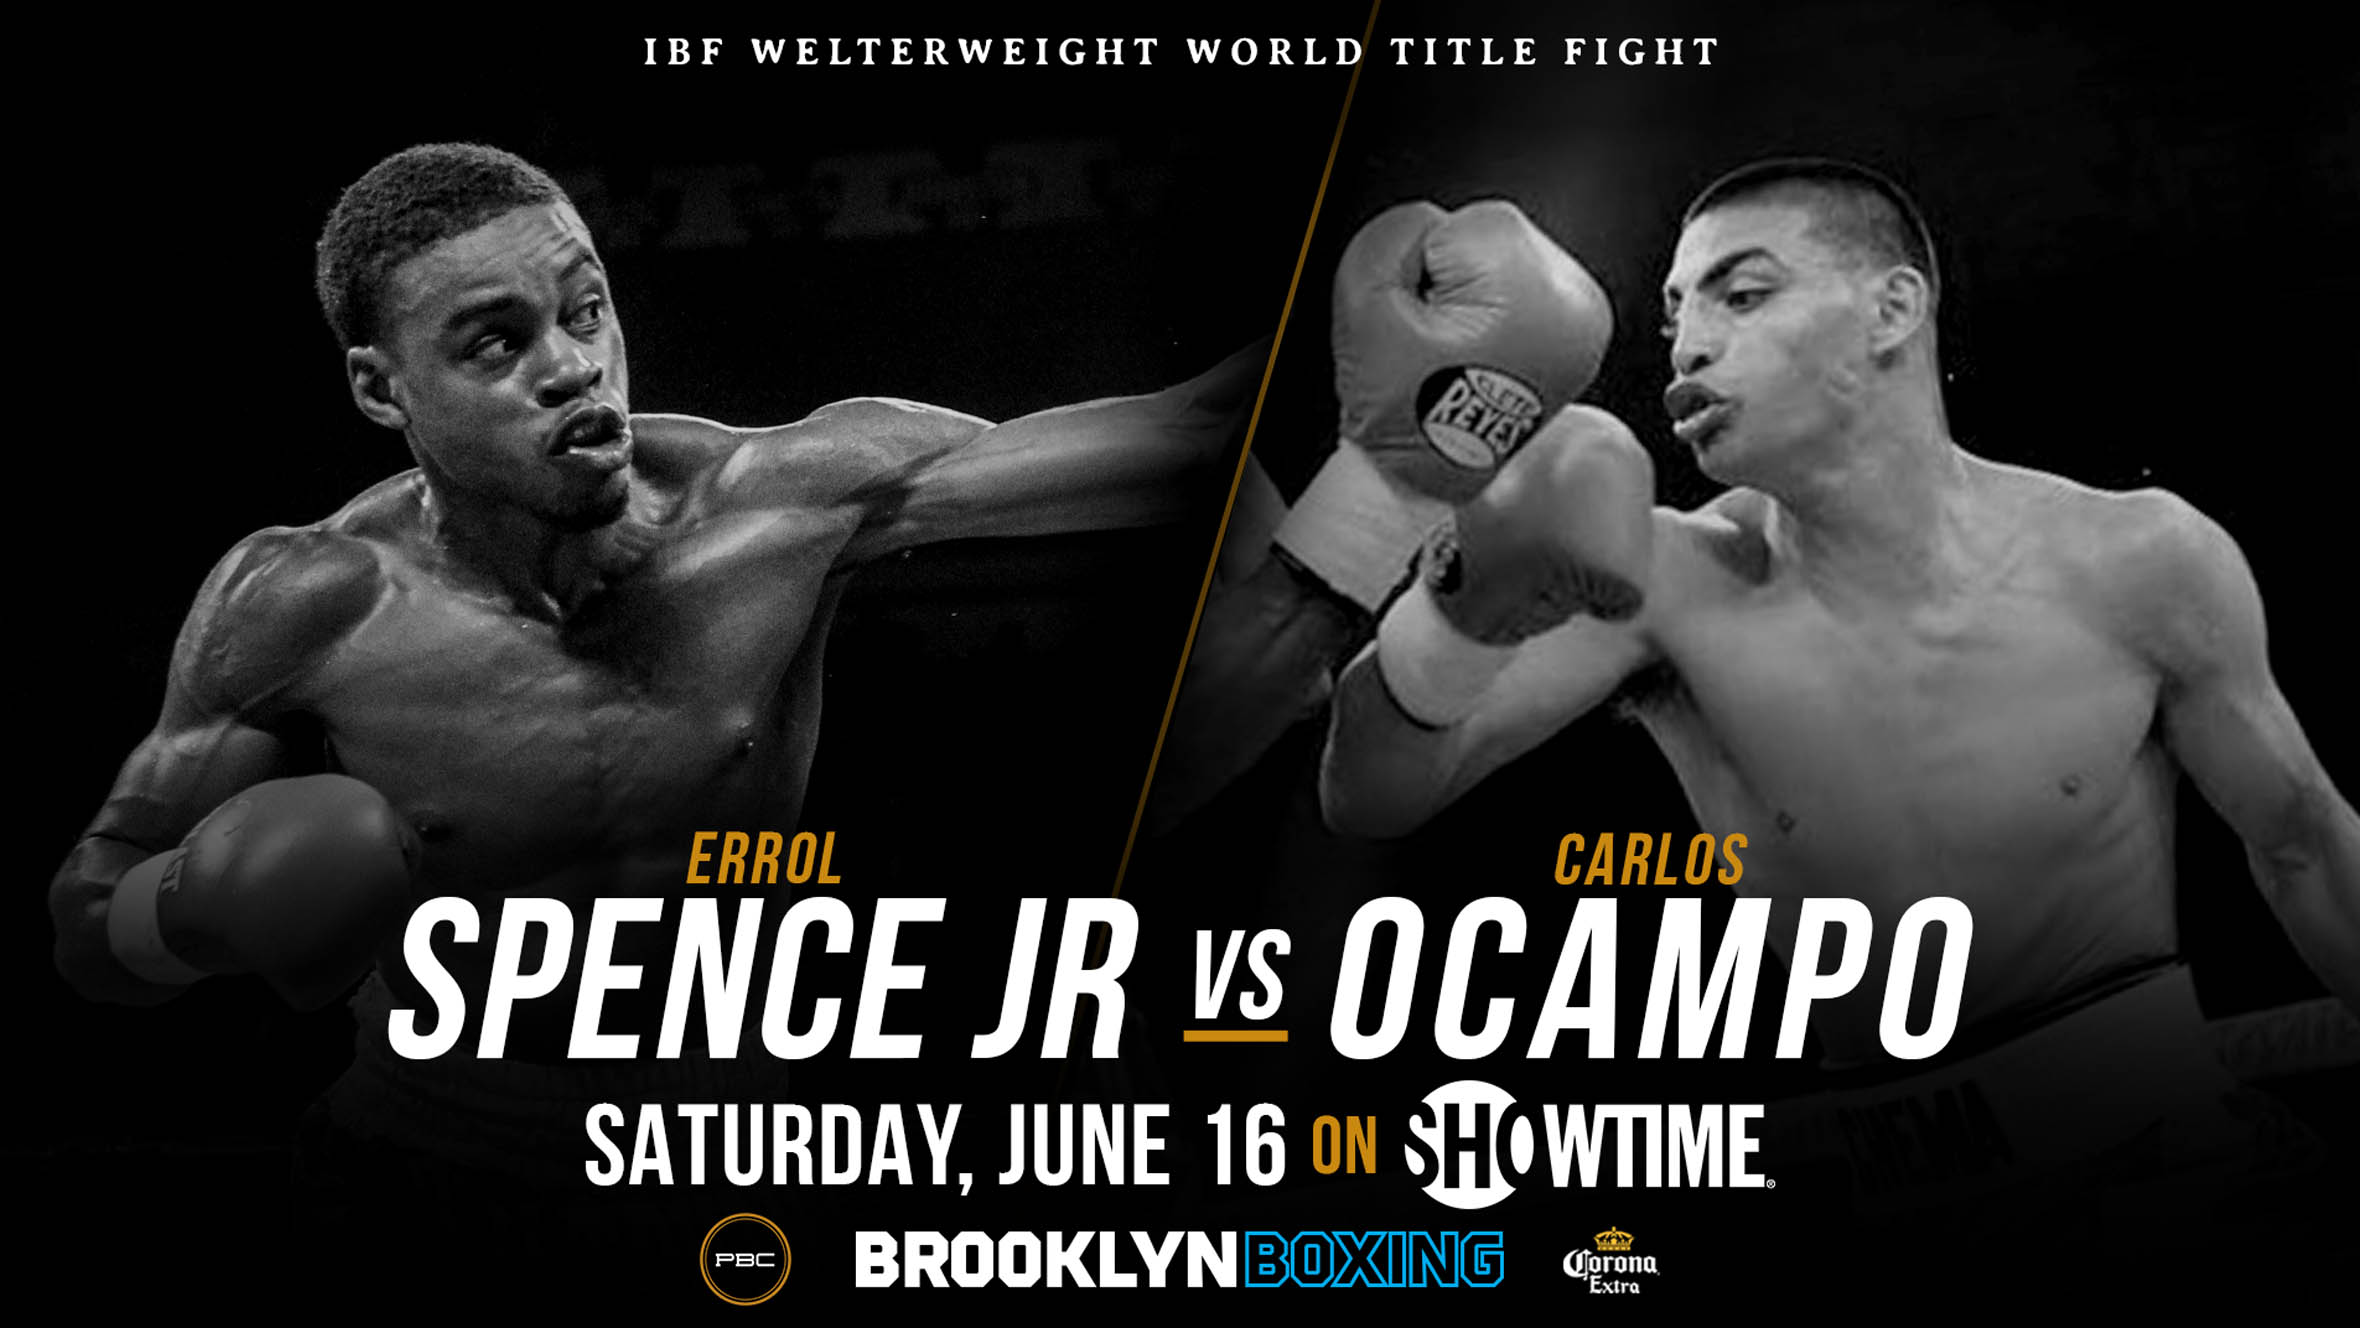 title bout championship boxing erroll spence